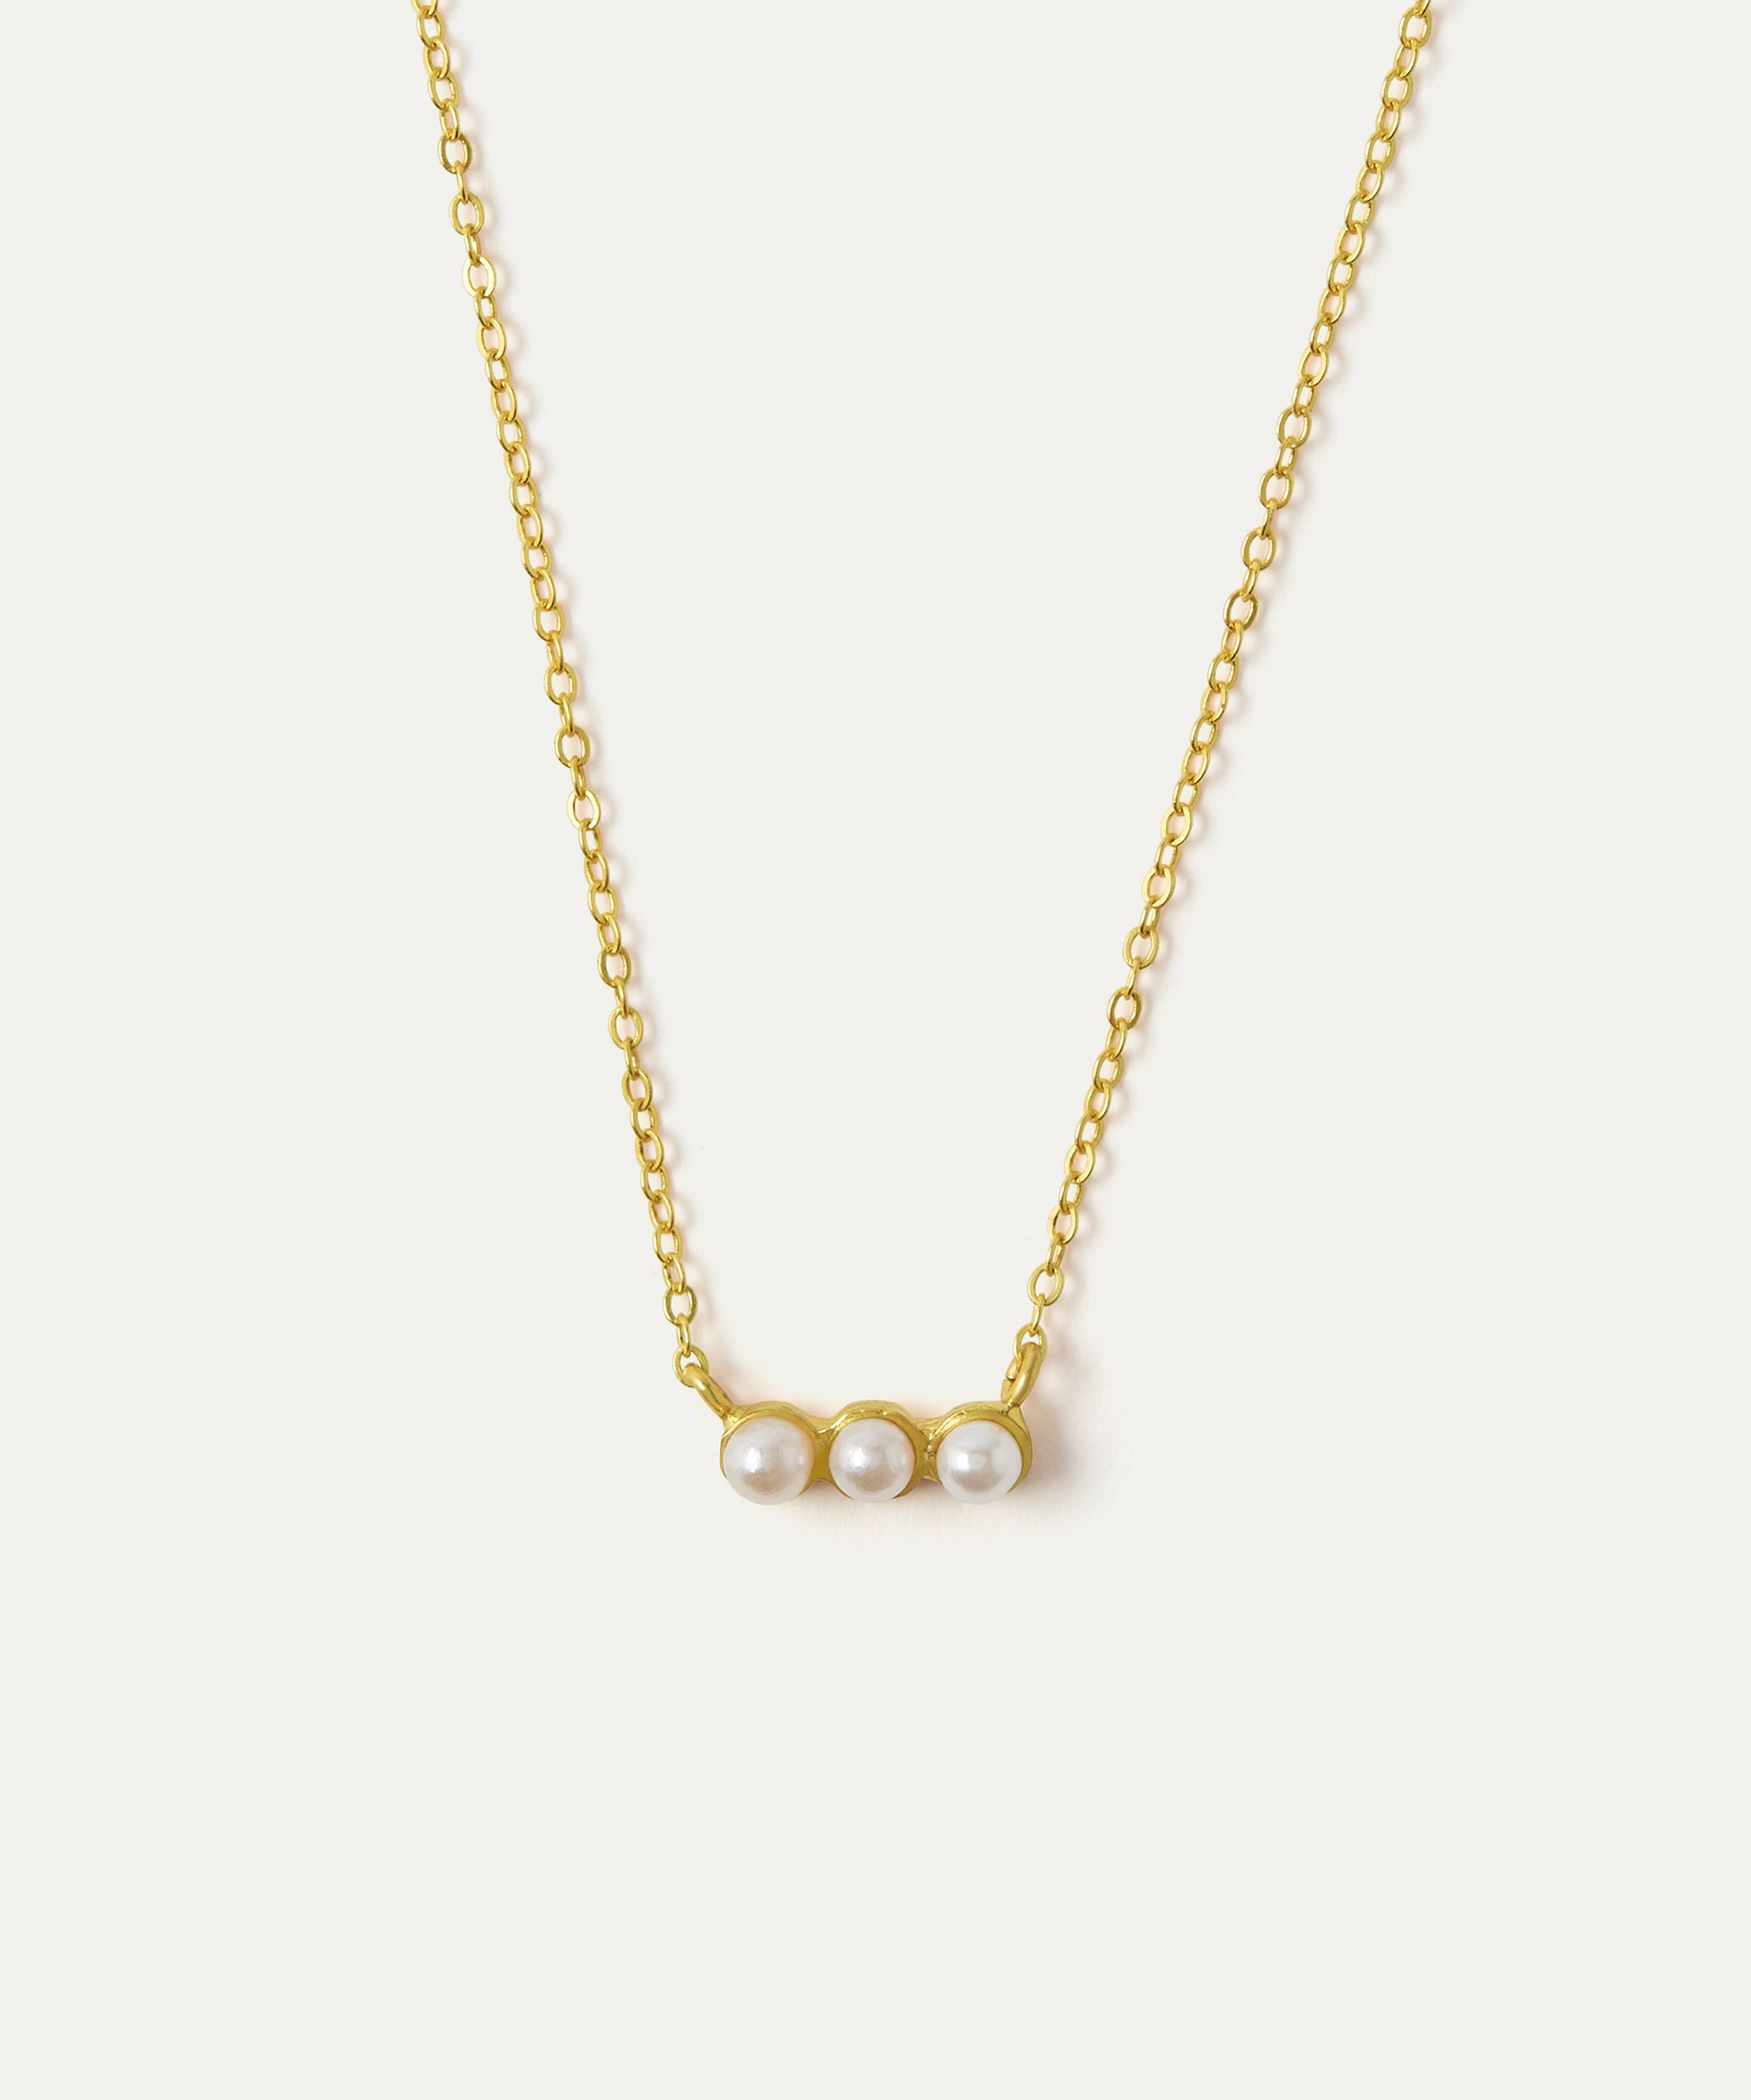 Lorelai Pearl Pendant Necklace | Sustainable Jewellery by Ottoman Hands